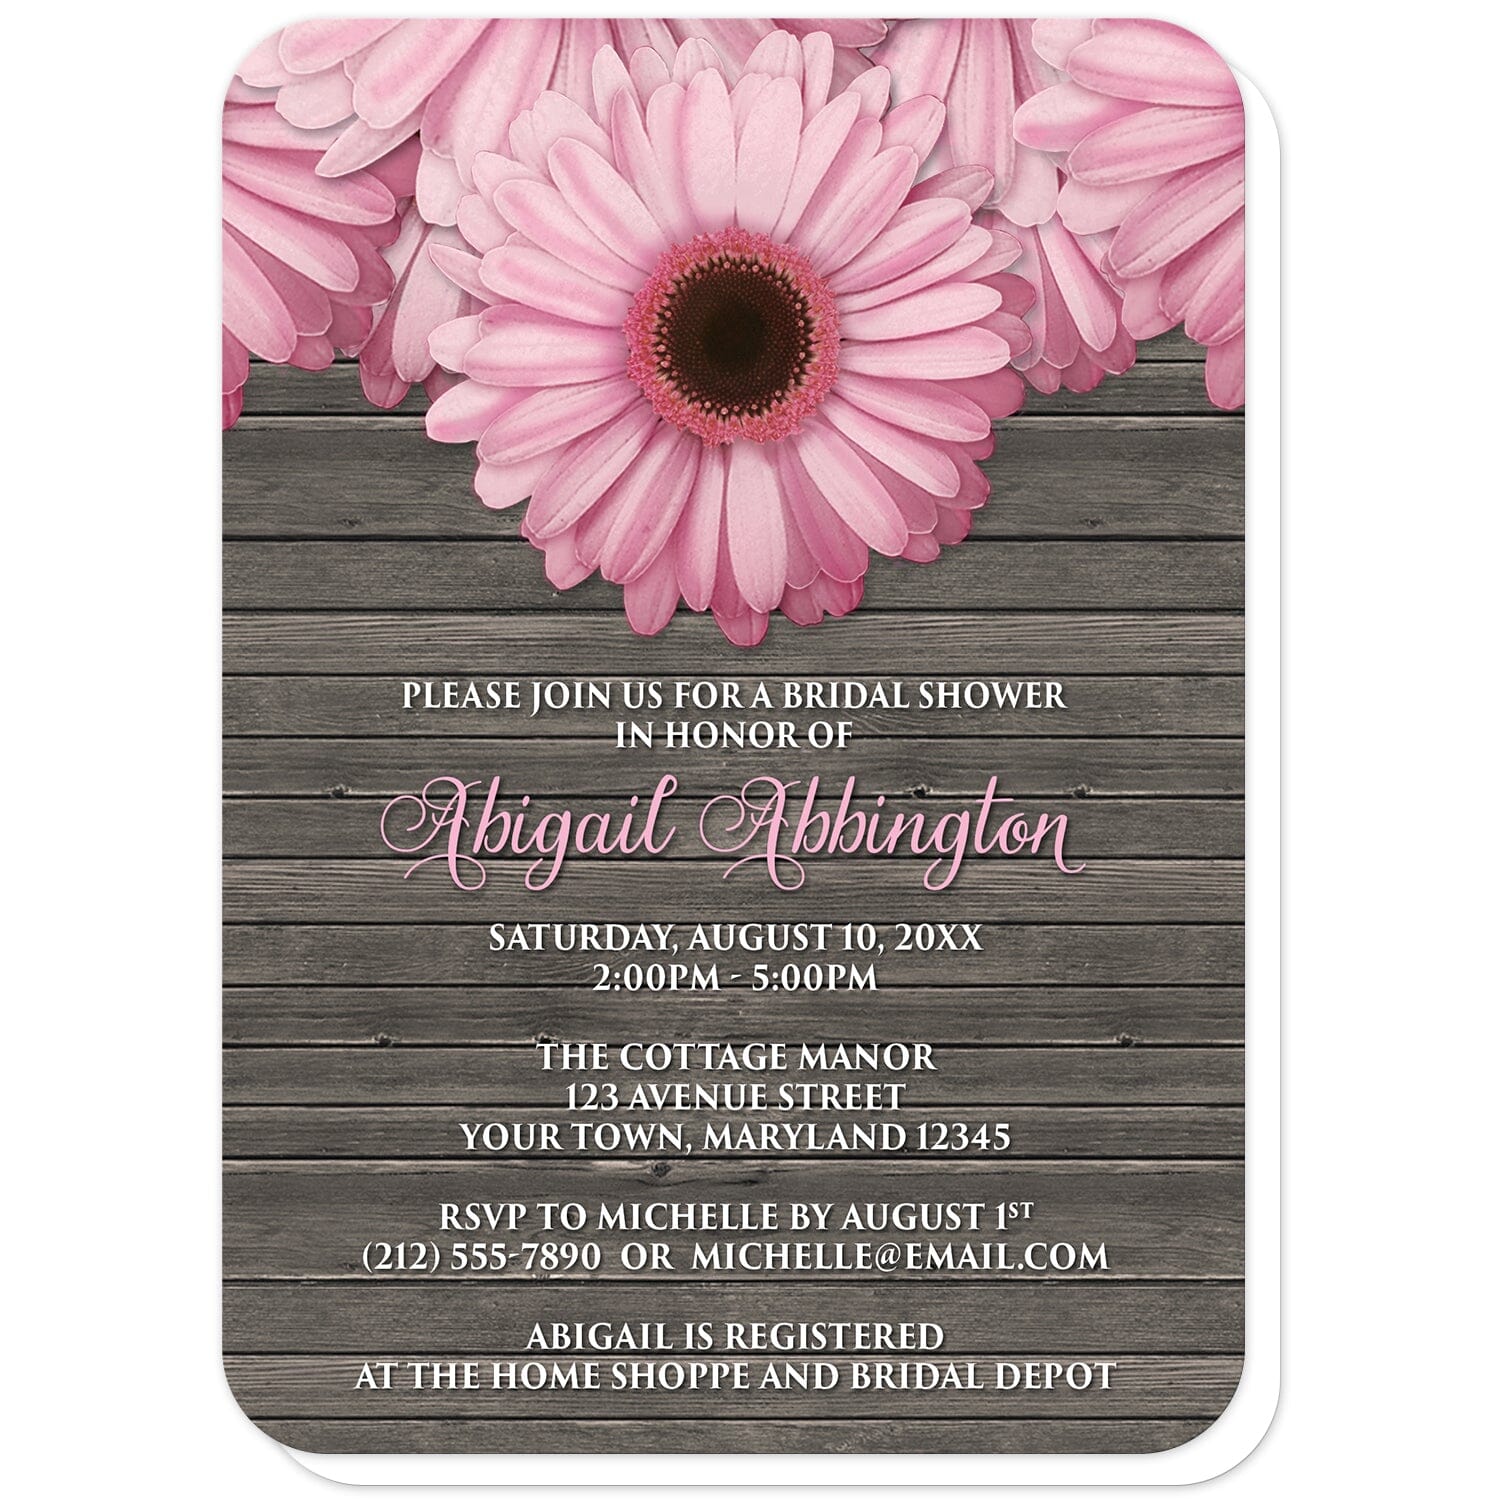 Rustic Pink Daisy Brown Wood Bridal Shower Invitations (with rounded corners) at Artistically Invited. Rustic pink daisy brown wood bridal shower invitations designed with large and lovely pink daisy flowers along the top over a country brown wood background illustration. Your personalized bridal shower celebration details are custom printed in pink and white over the wood background design below the pretty pink daisies.